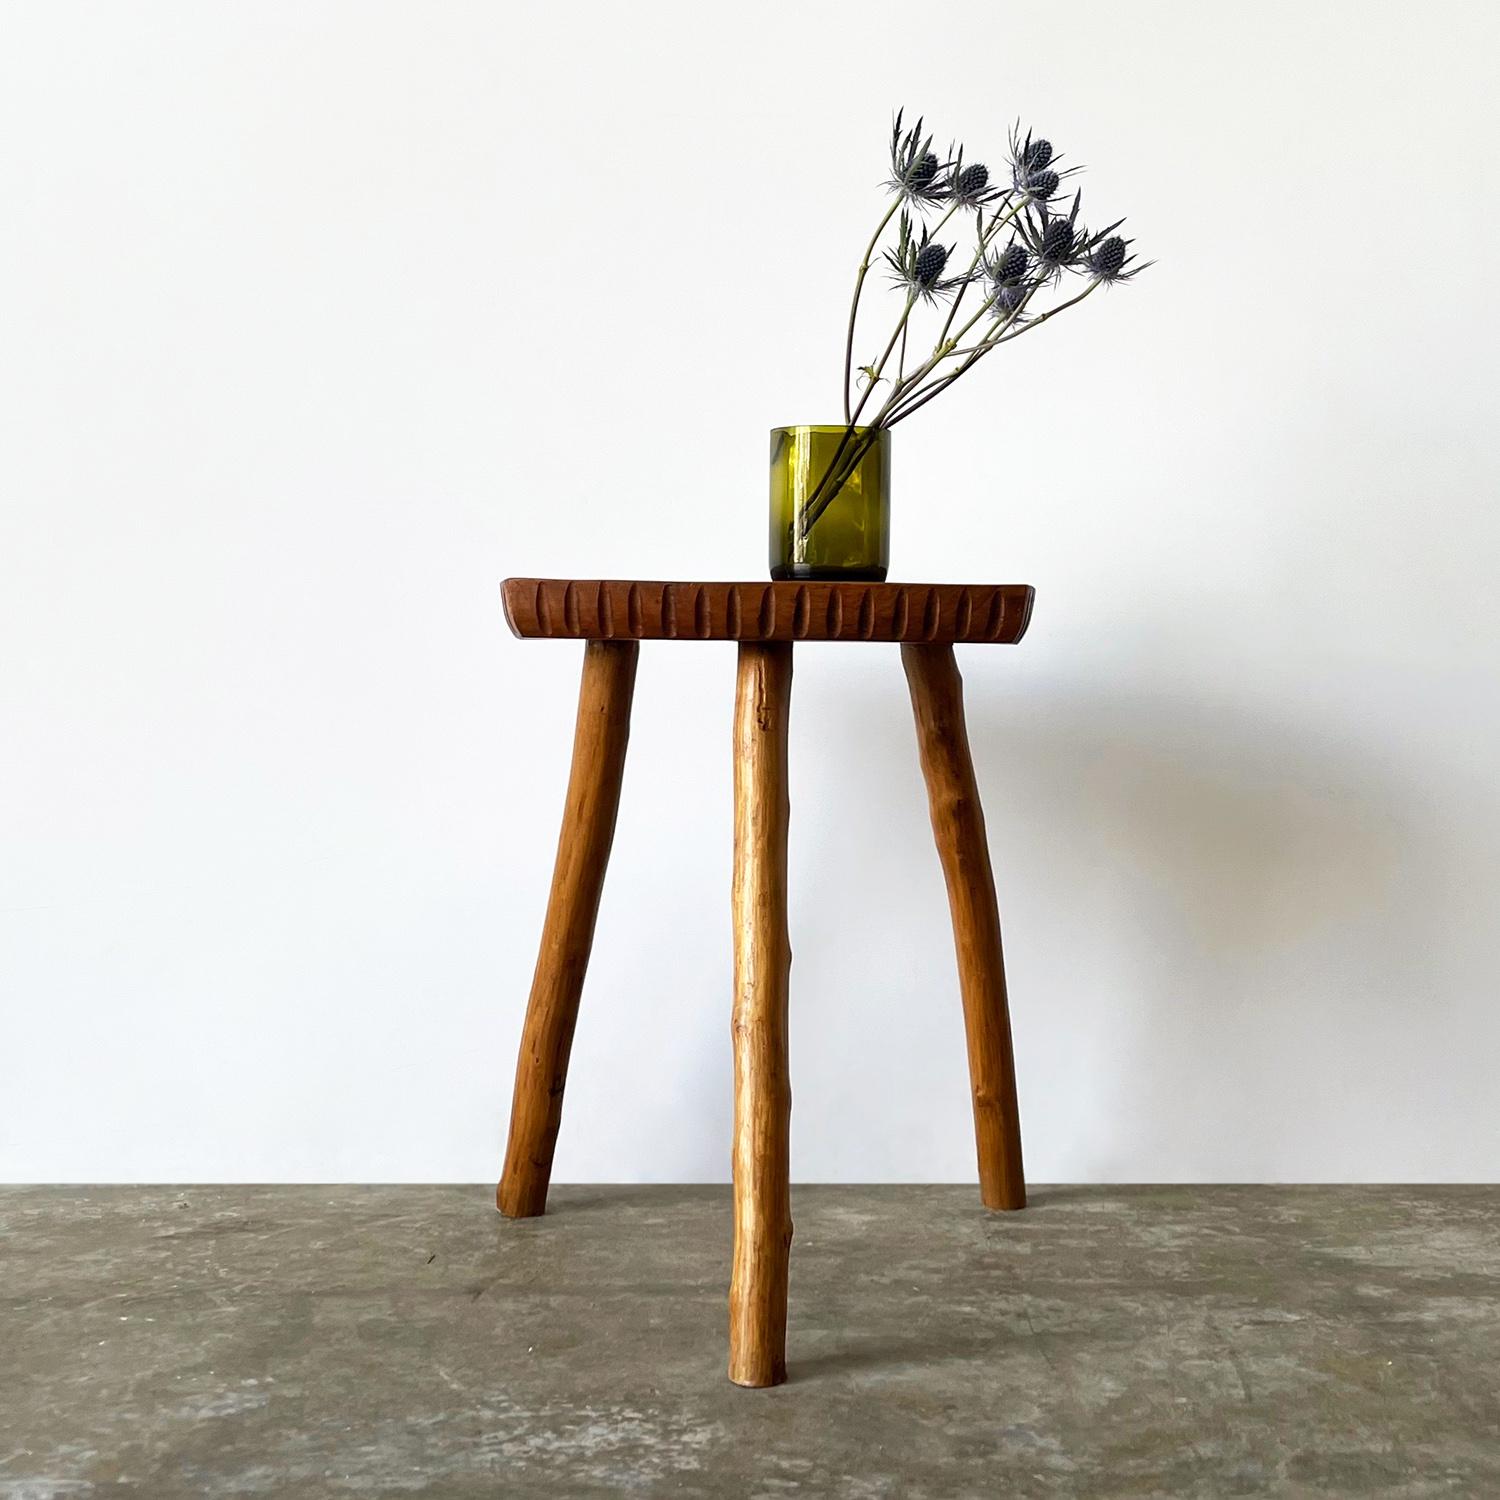 French rustic tripod stool
France, mid century
Can be used as a stool or side table
Rectangular with carved etchings around the perimeter
Original wood finish
Beautiful grain detail and joinery detail
Solid wood tripod legs
Patina from age